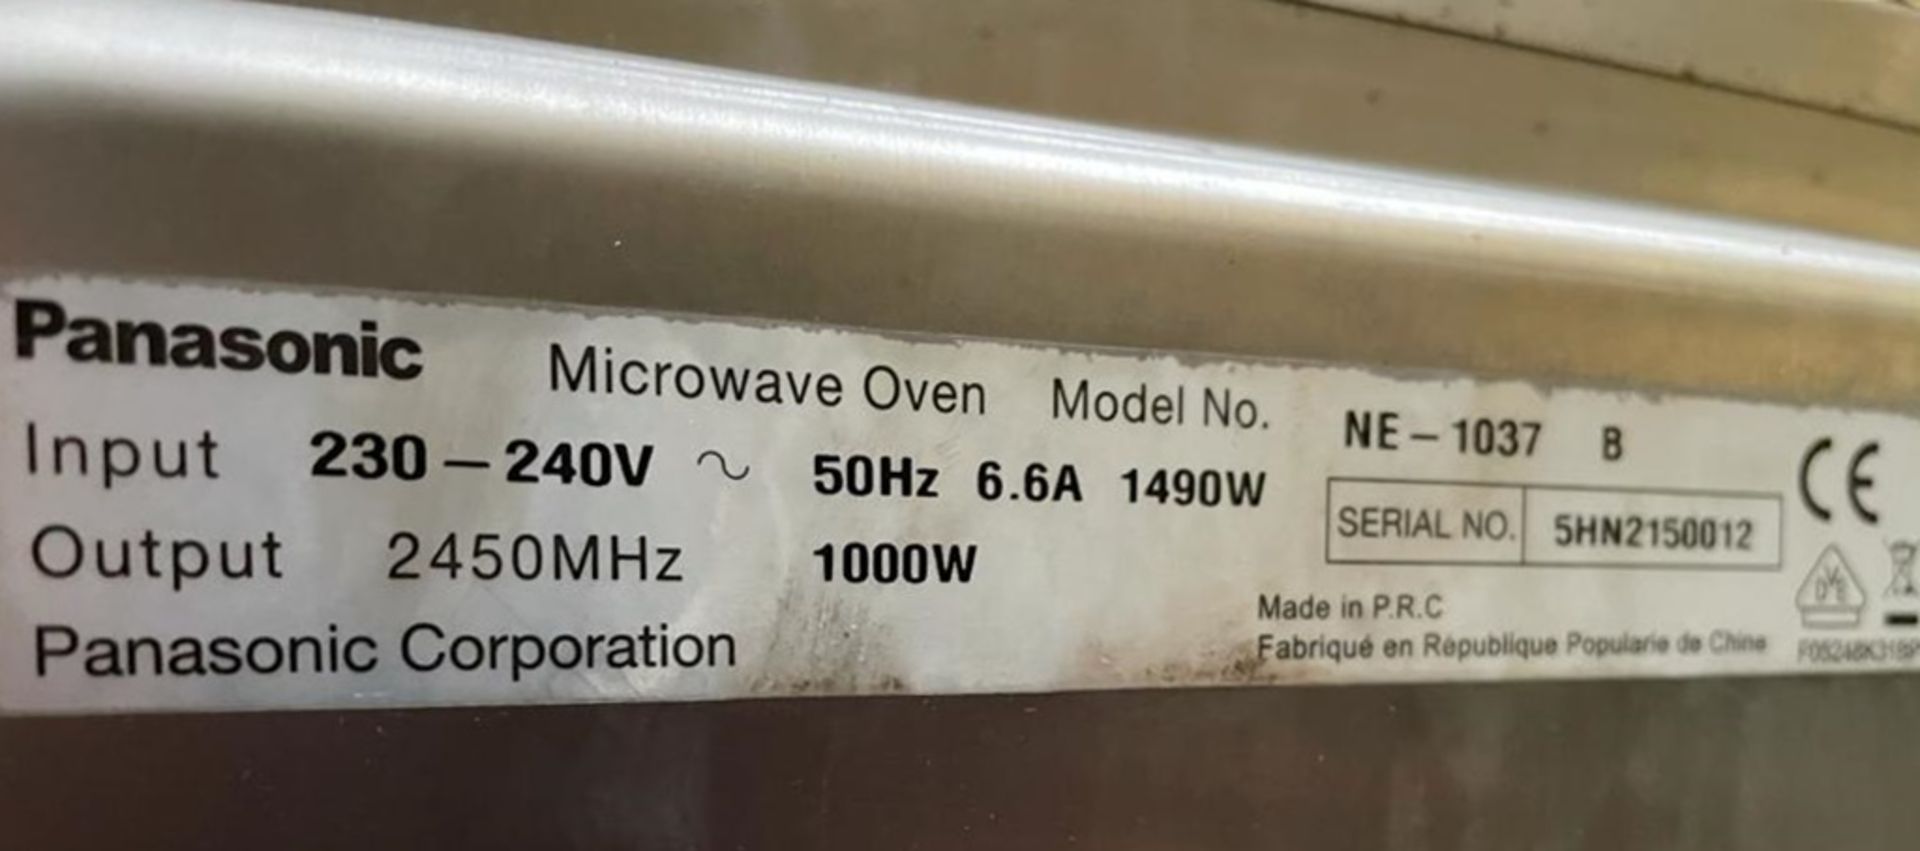 1 x Panasonic NE-1037 Commercial Microwave Oven - 240v - CL667 - Location: Brighton, Sussex, - Image 2 of 4